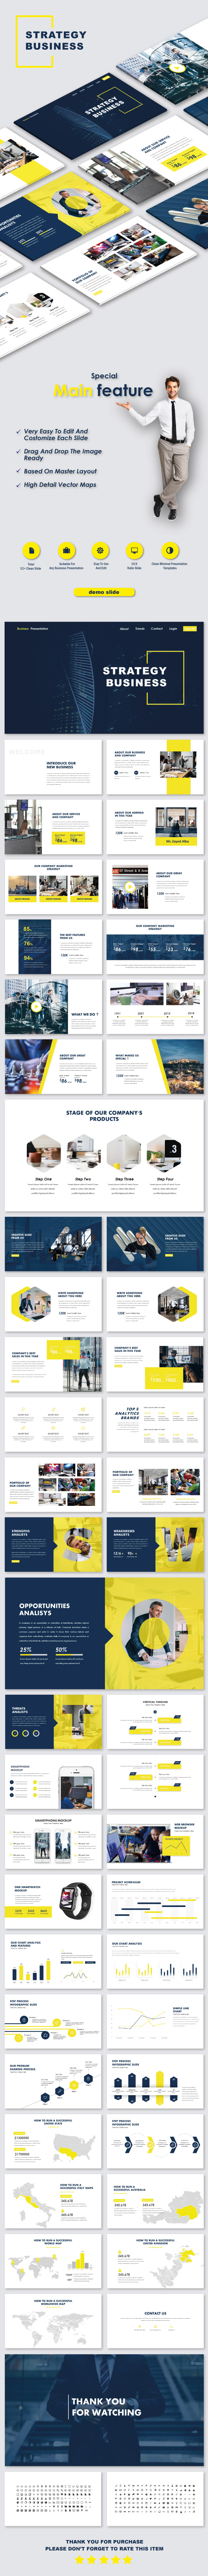 Strategy Business PowerPoint Templates